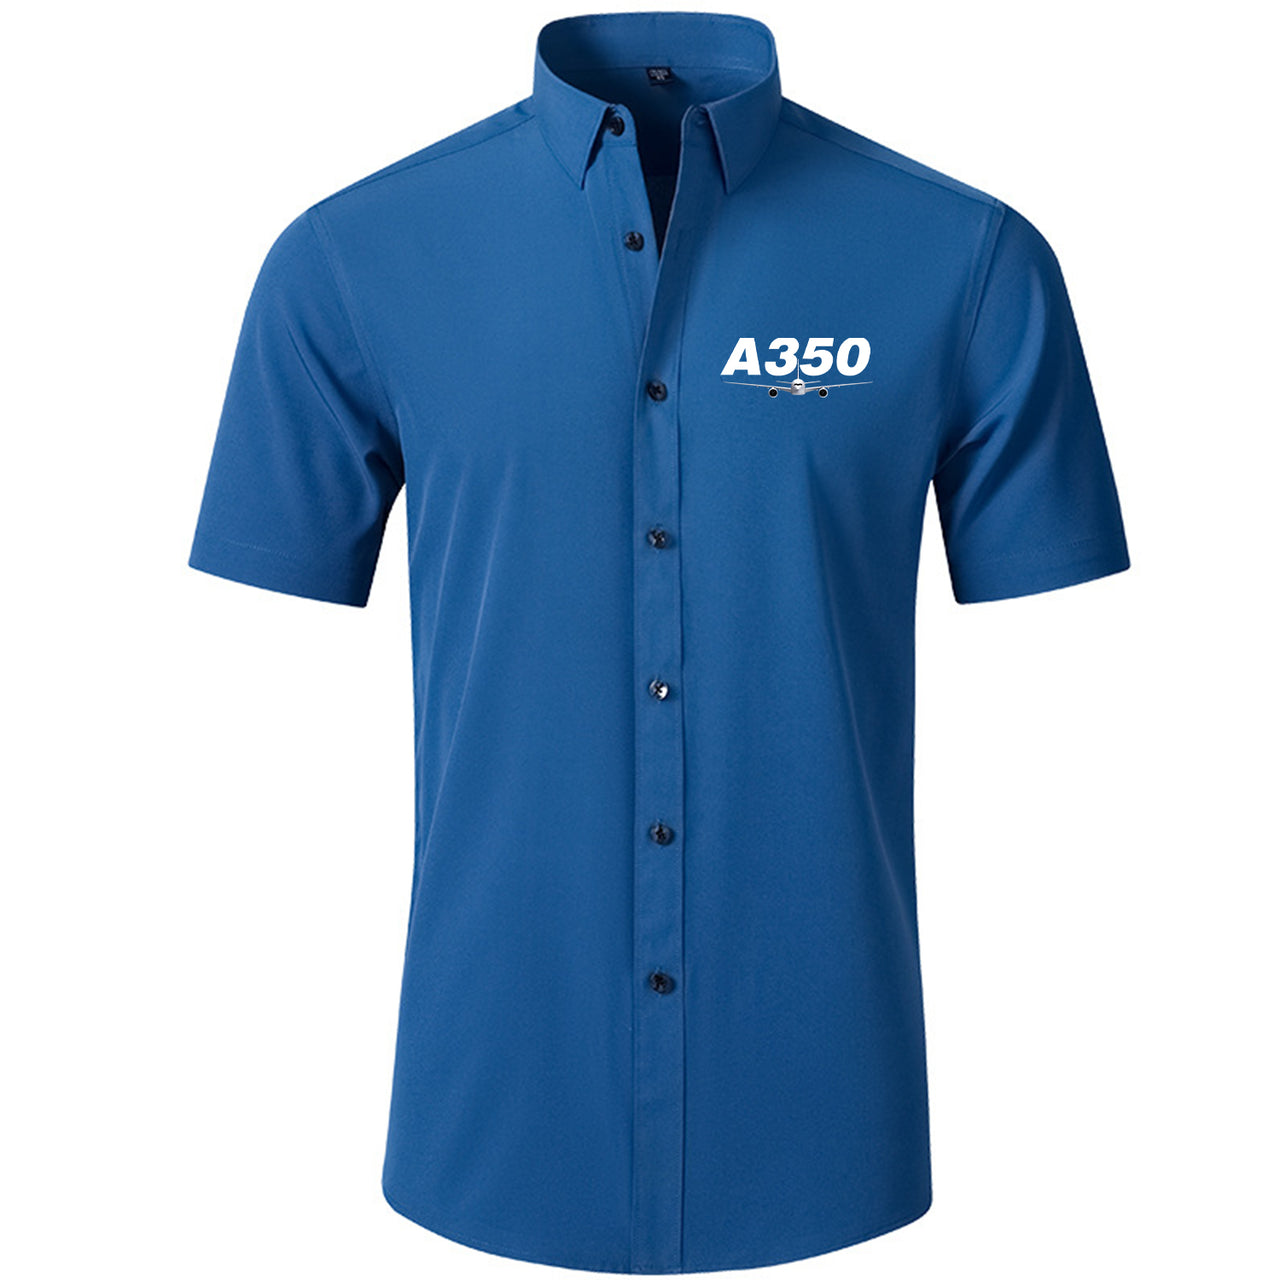 Super Airbus A350 Designed Short Sleeve Shirts